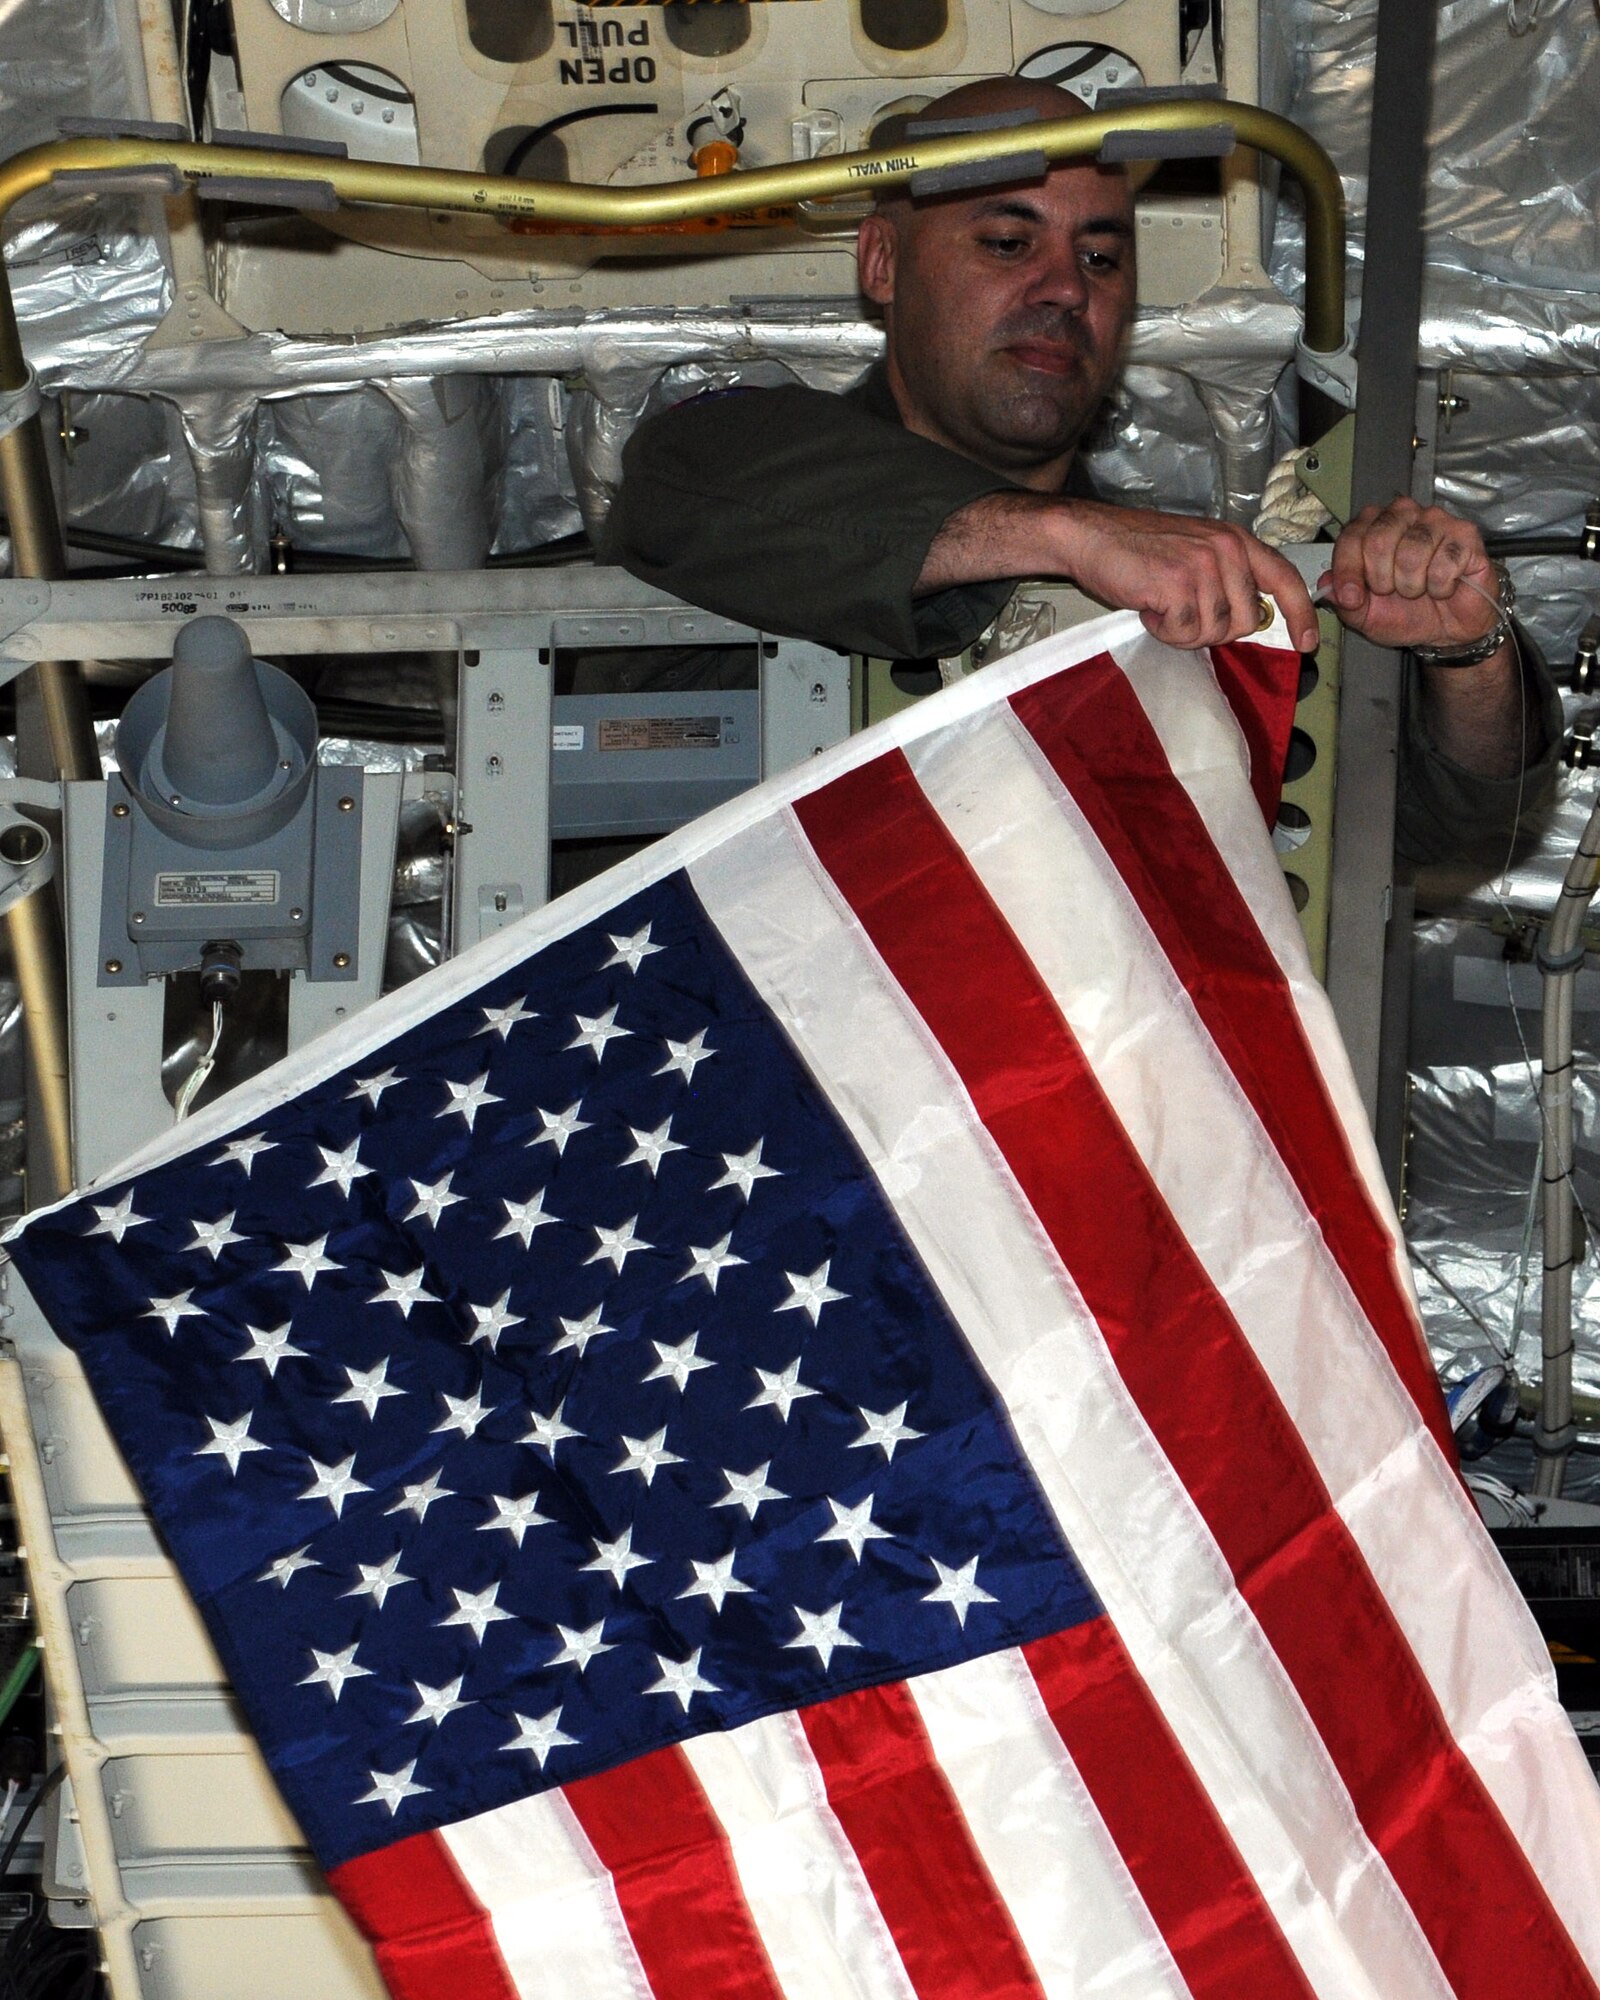 ALTUS AIR FORCE BASE, Okla. -- Capt. Jeremy J. Farlaino, 97th Training Squadron chief of C-17 wing training, hangs an American flag from the cat-walk on a C-17 Globemaster III March 22, before departing to support Operation Odyssey Dawn. Capt. Farlaino is the aircraft commander during this mission. (U.S. Air Force photo by Airman 1st Class Kenneth W. Norman/ Released 97th Air Mobility Wing Public Affairs.)